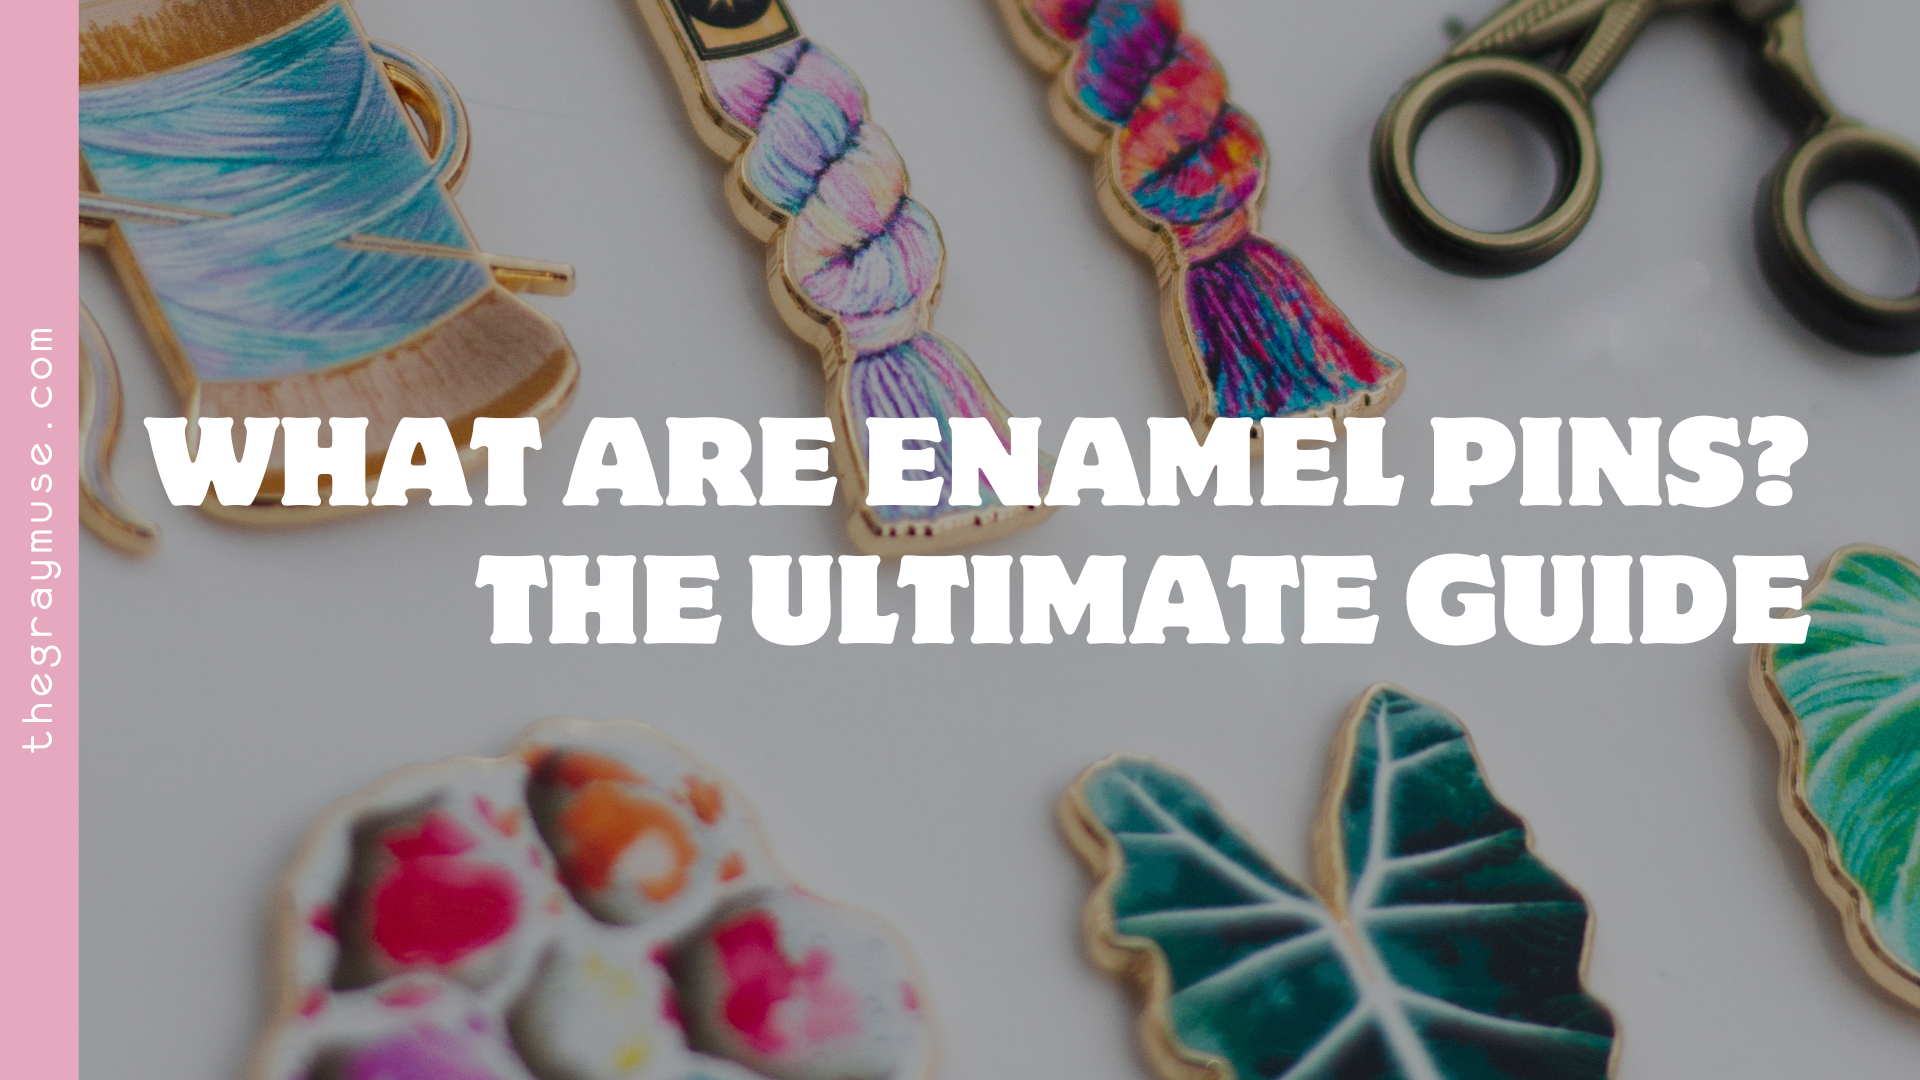 What Are Enamel Pins? The Ultimate Guide